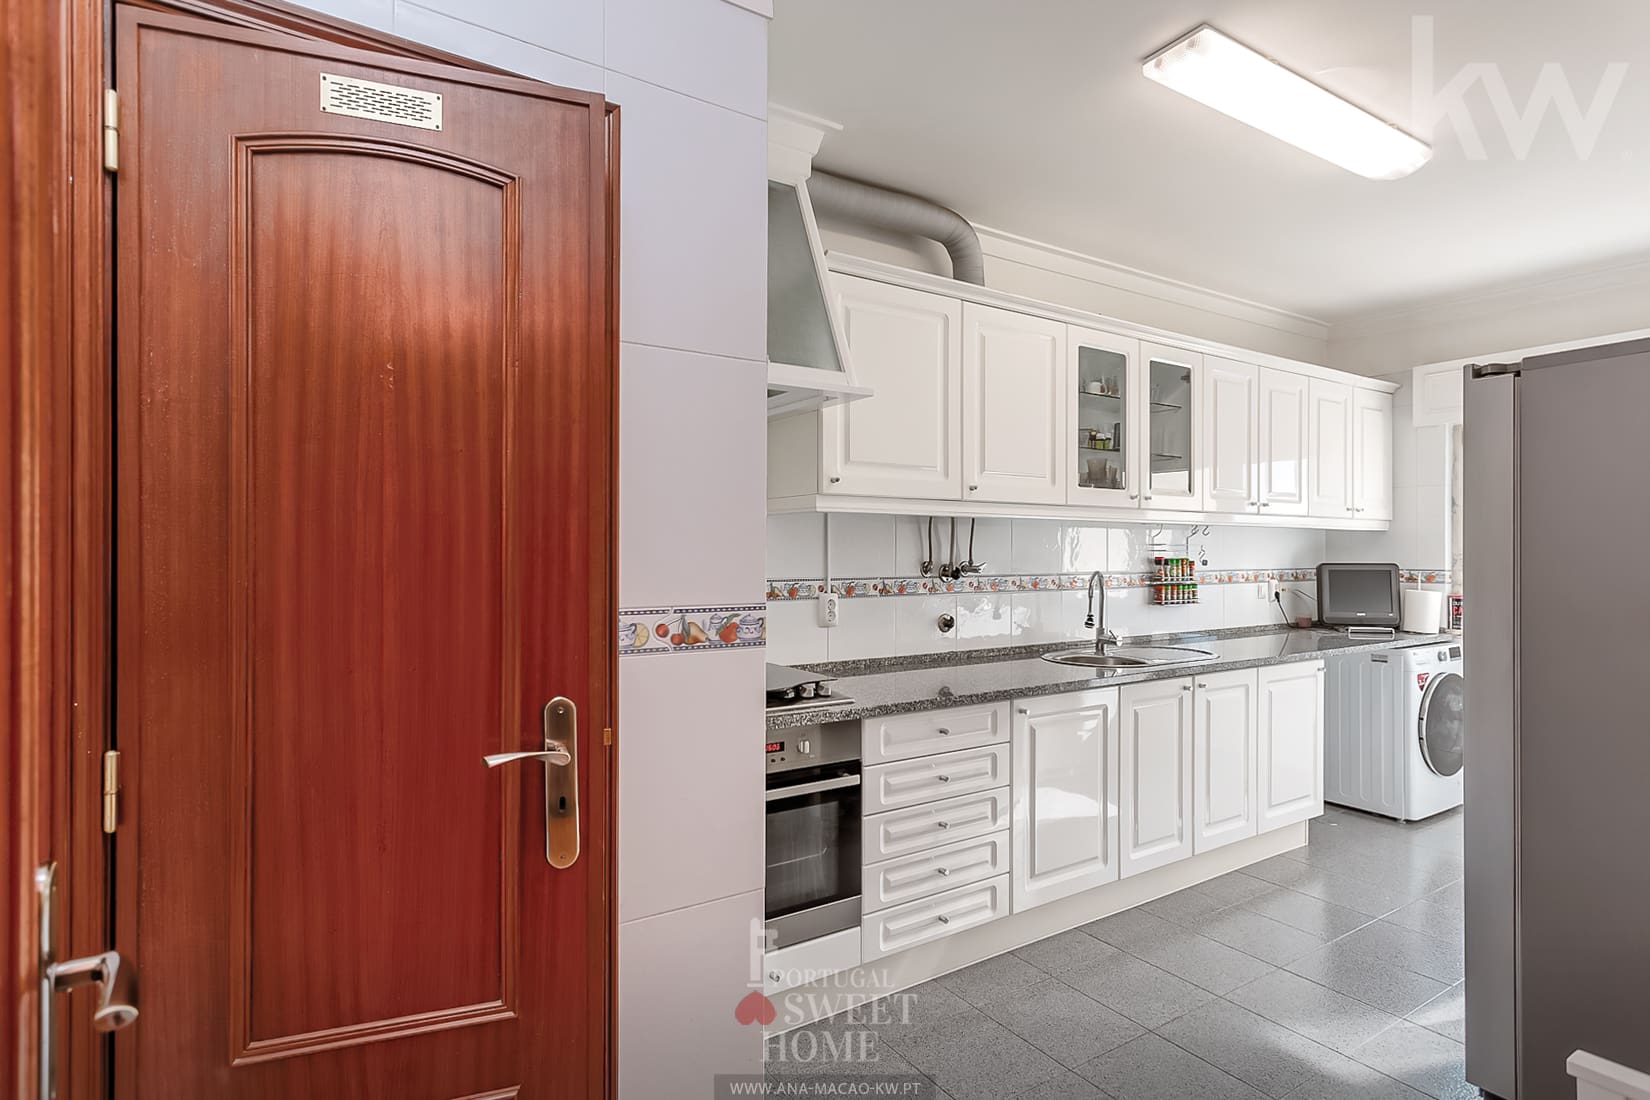 Fully equipped kitchen (12.84 m2)